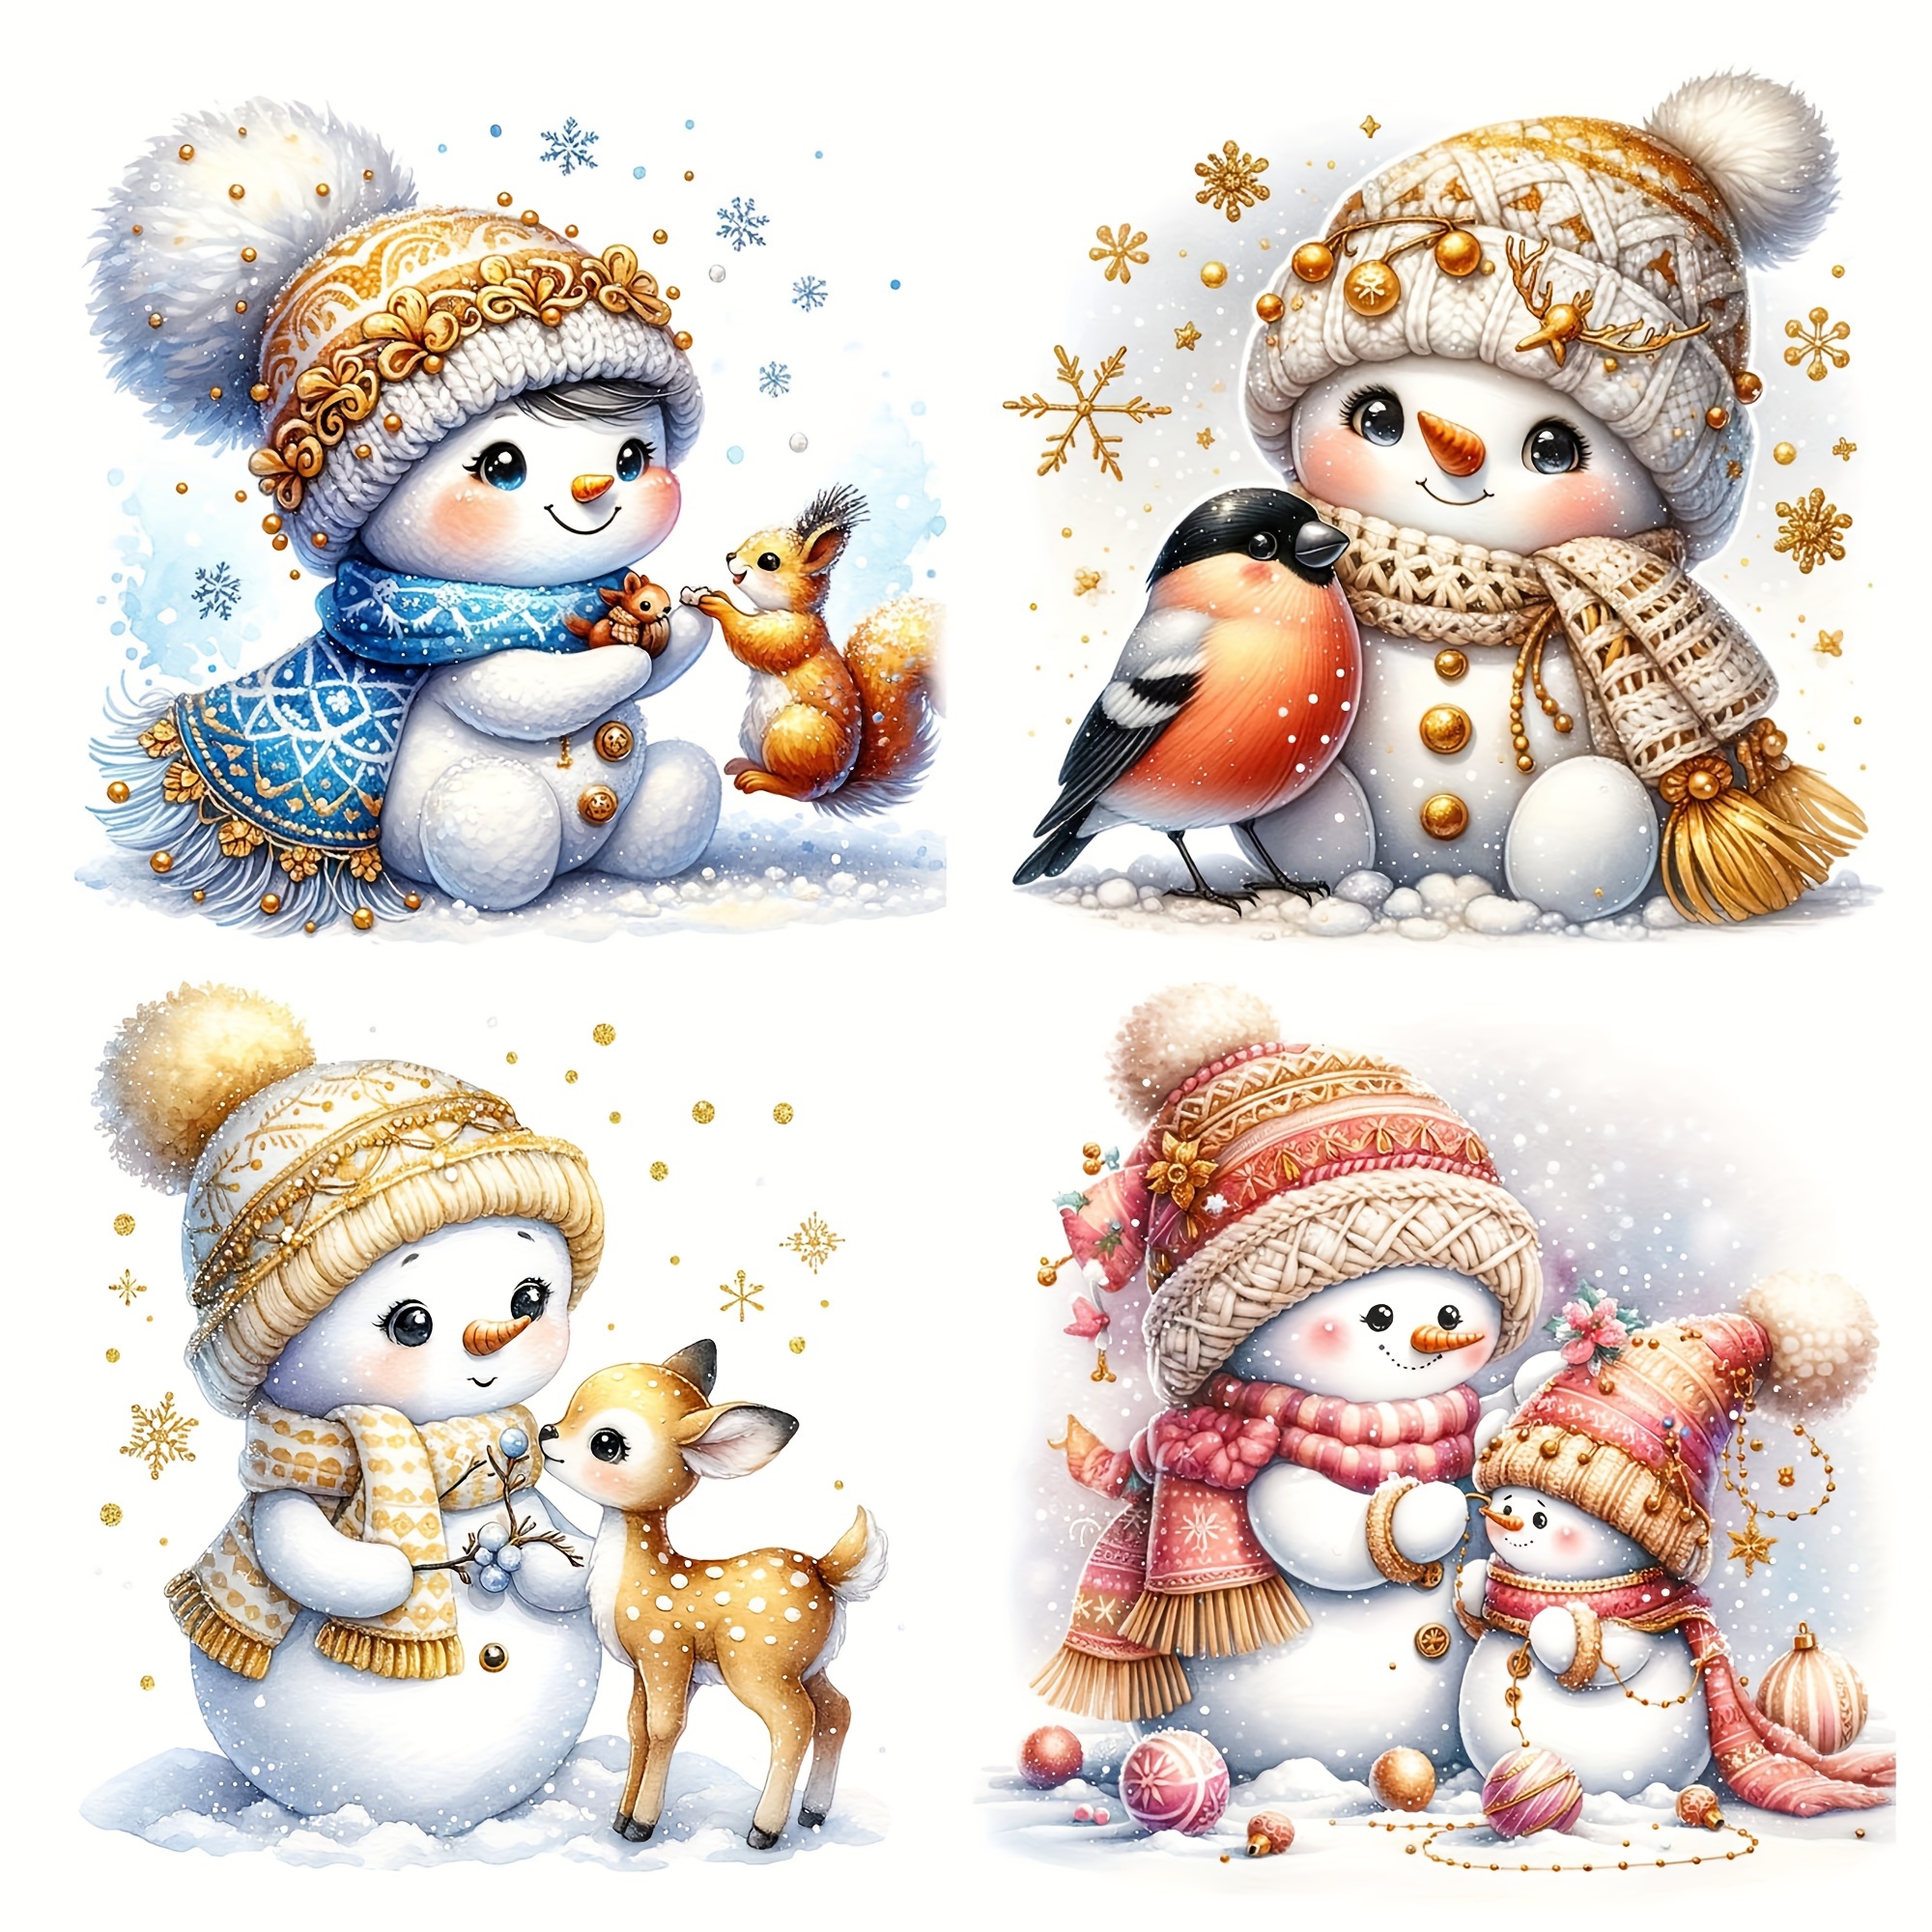 

Cartoon Snowmen 5d Diamond Painting Kit For Adults - Diy Round Diamond Art Craft With Acrylic Gems, Complete Diamond Coverage - Whimsical Wall Decor And Gift For Beginners